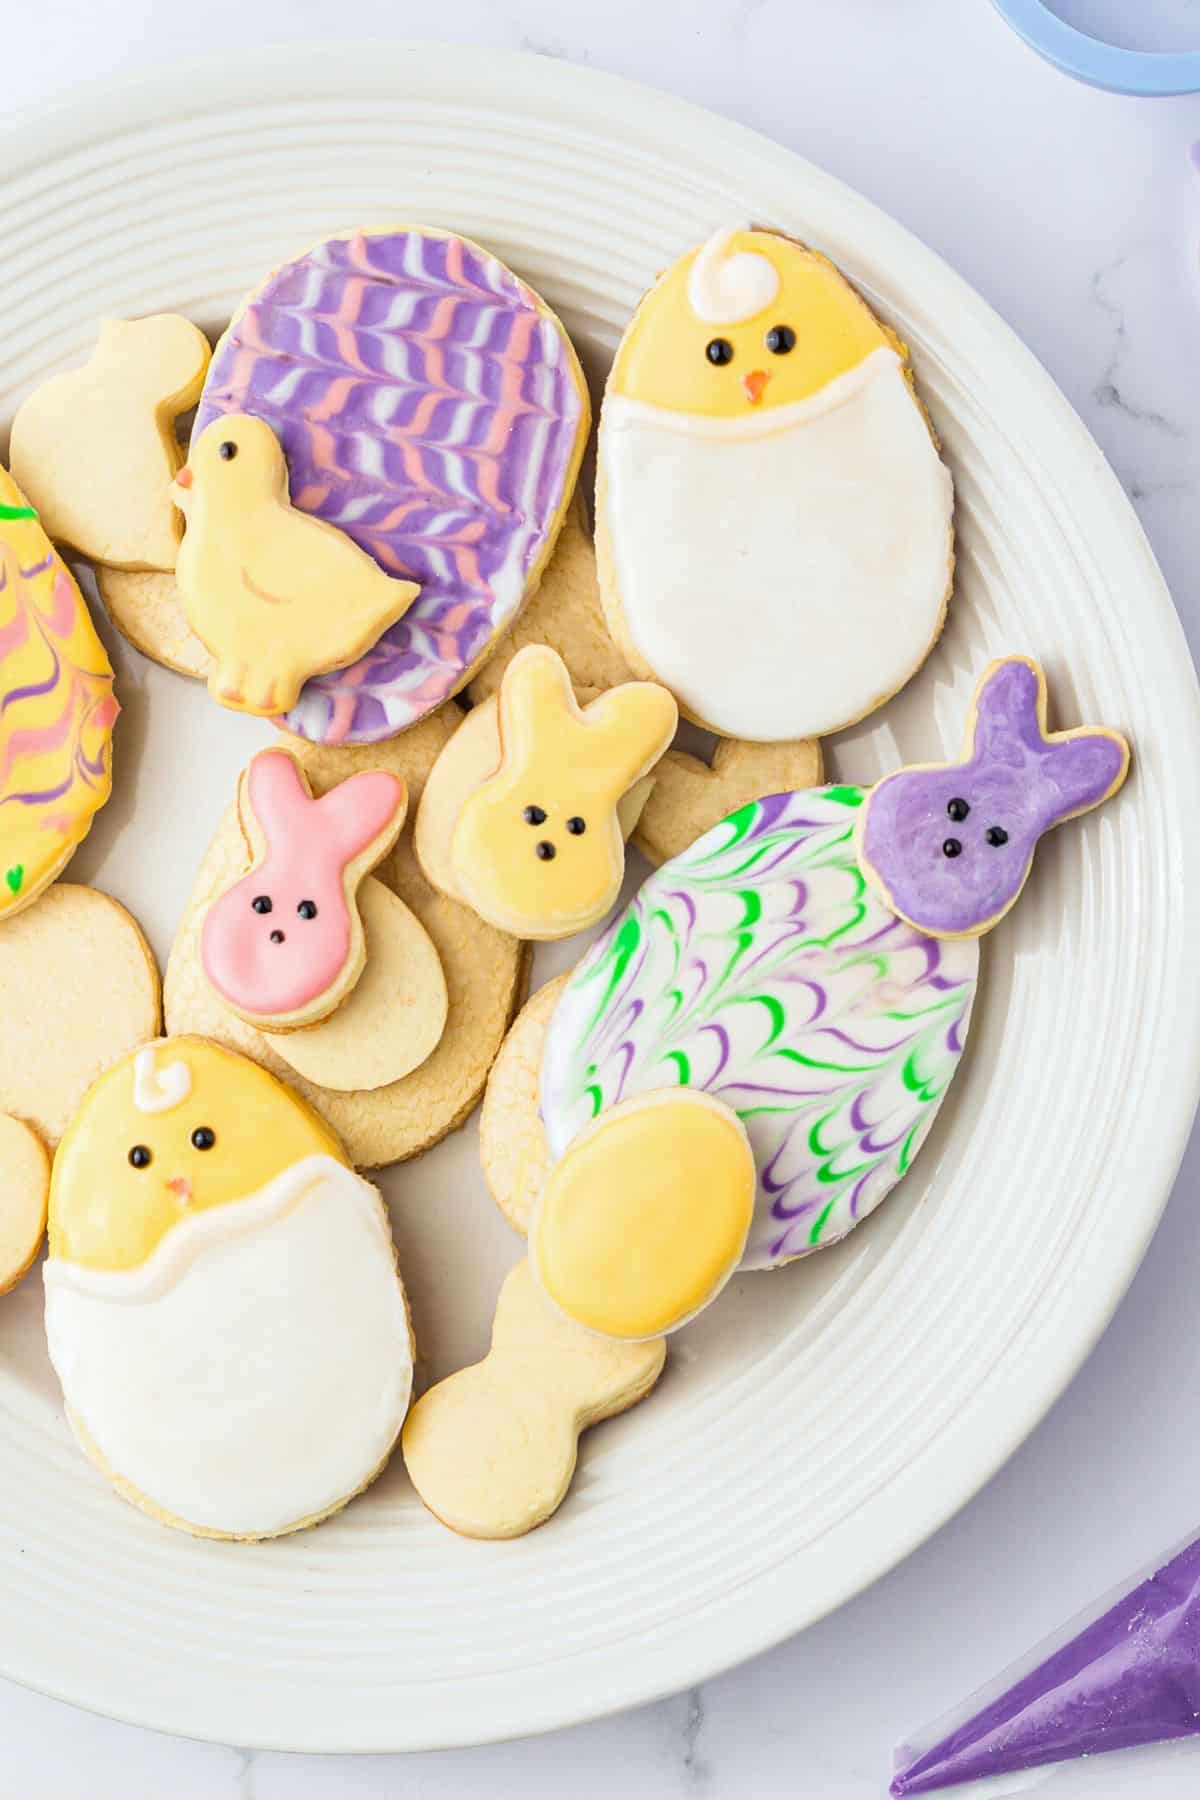 How To Make Gluten Free Easter Cookies - Fearless Dining